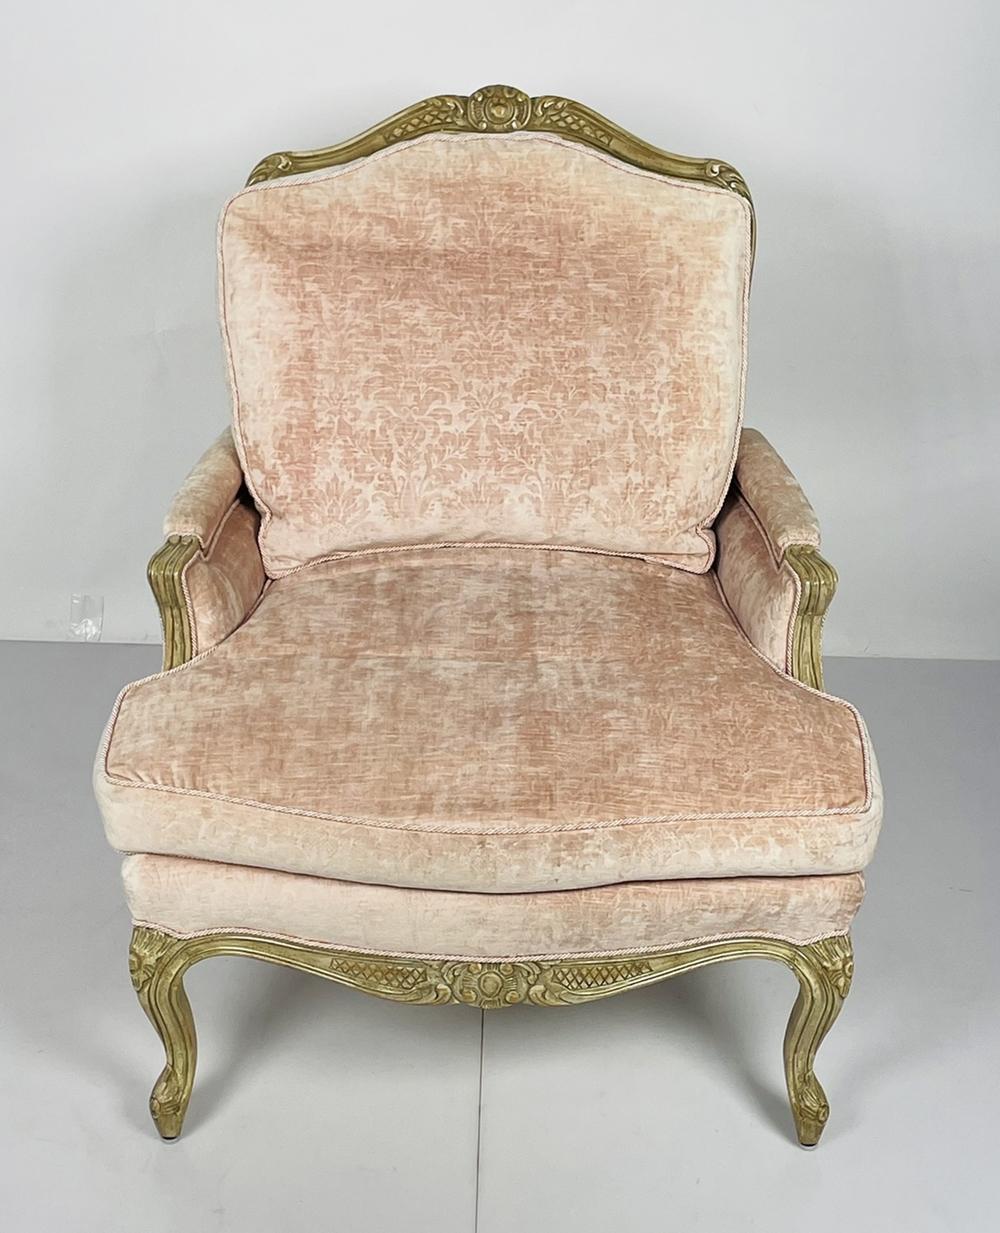 Introducing our exquisite French Louis XV Style Bergere, a stunning addition to any interior space. This chair exudes elegance and sophistication with its ornate gold frame and luxurious pink fabric upholstery. Crafted in the timeless Louis XV